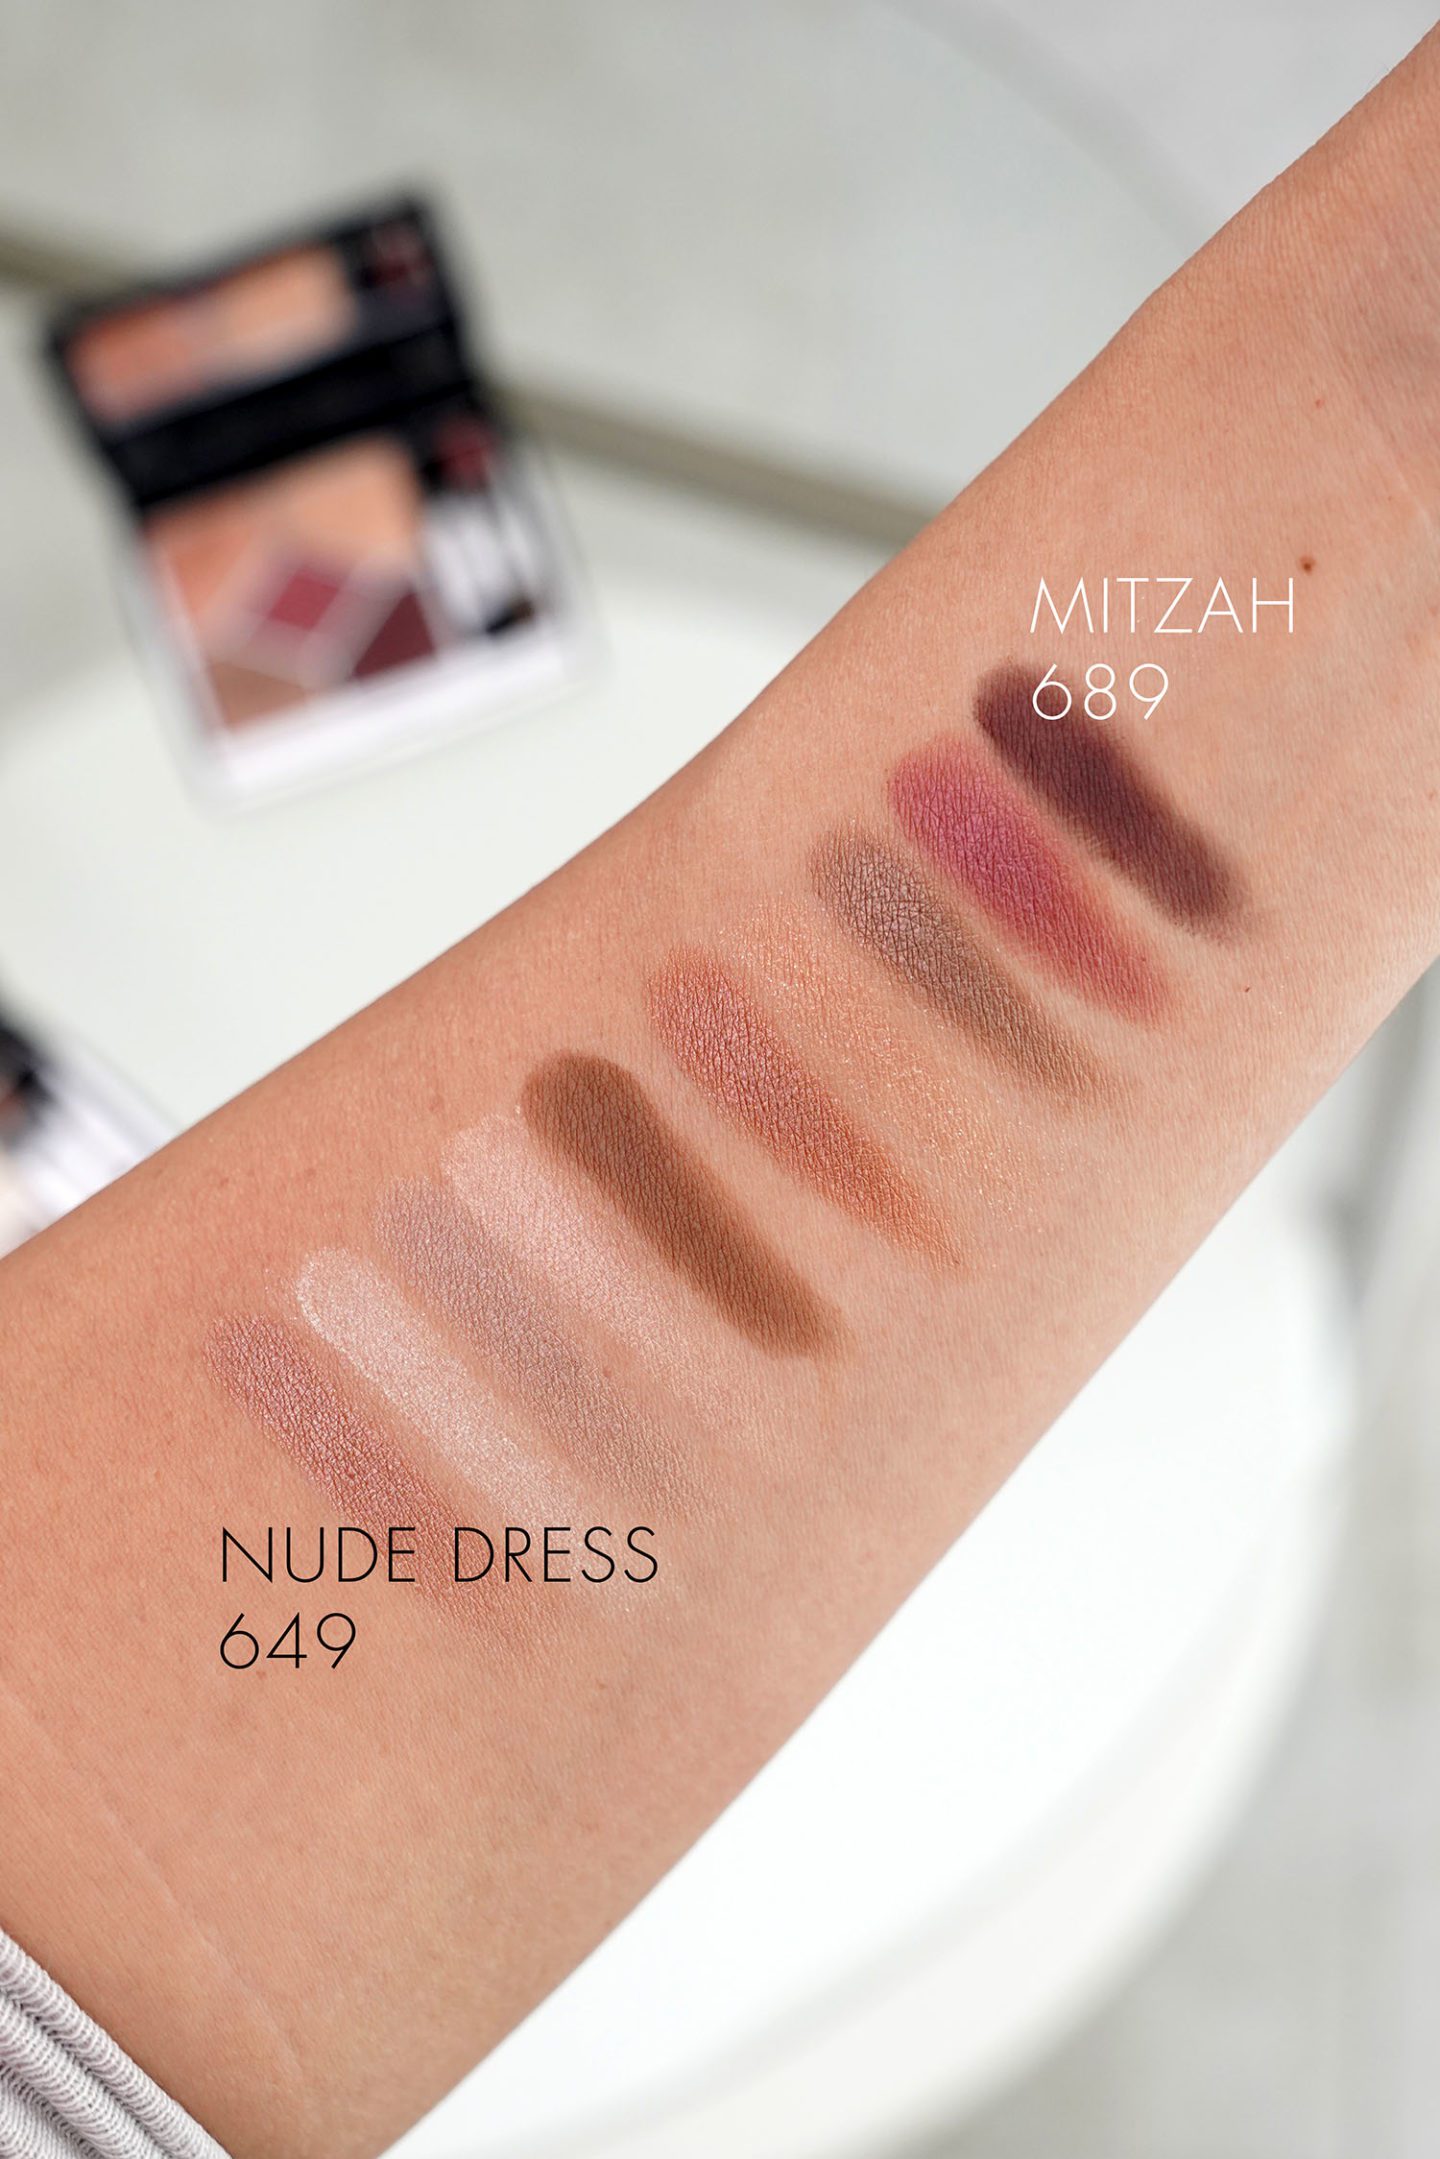 Dior 5 Couleurs Eyeshadows in Nude Dress and Mitzah swatches